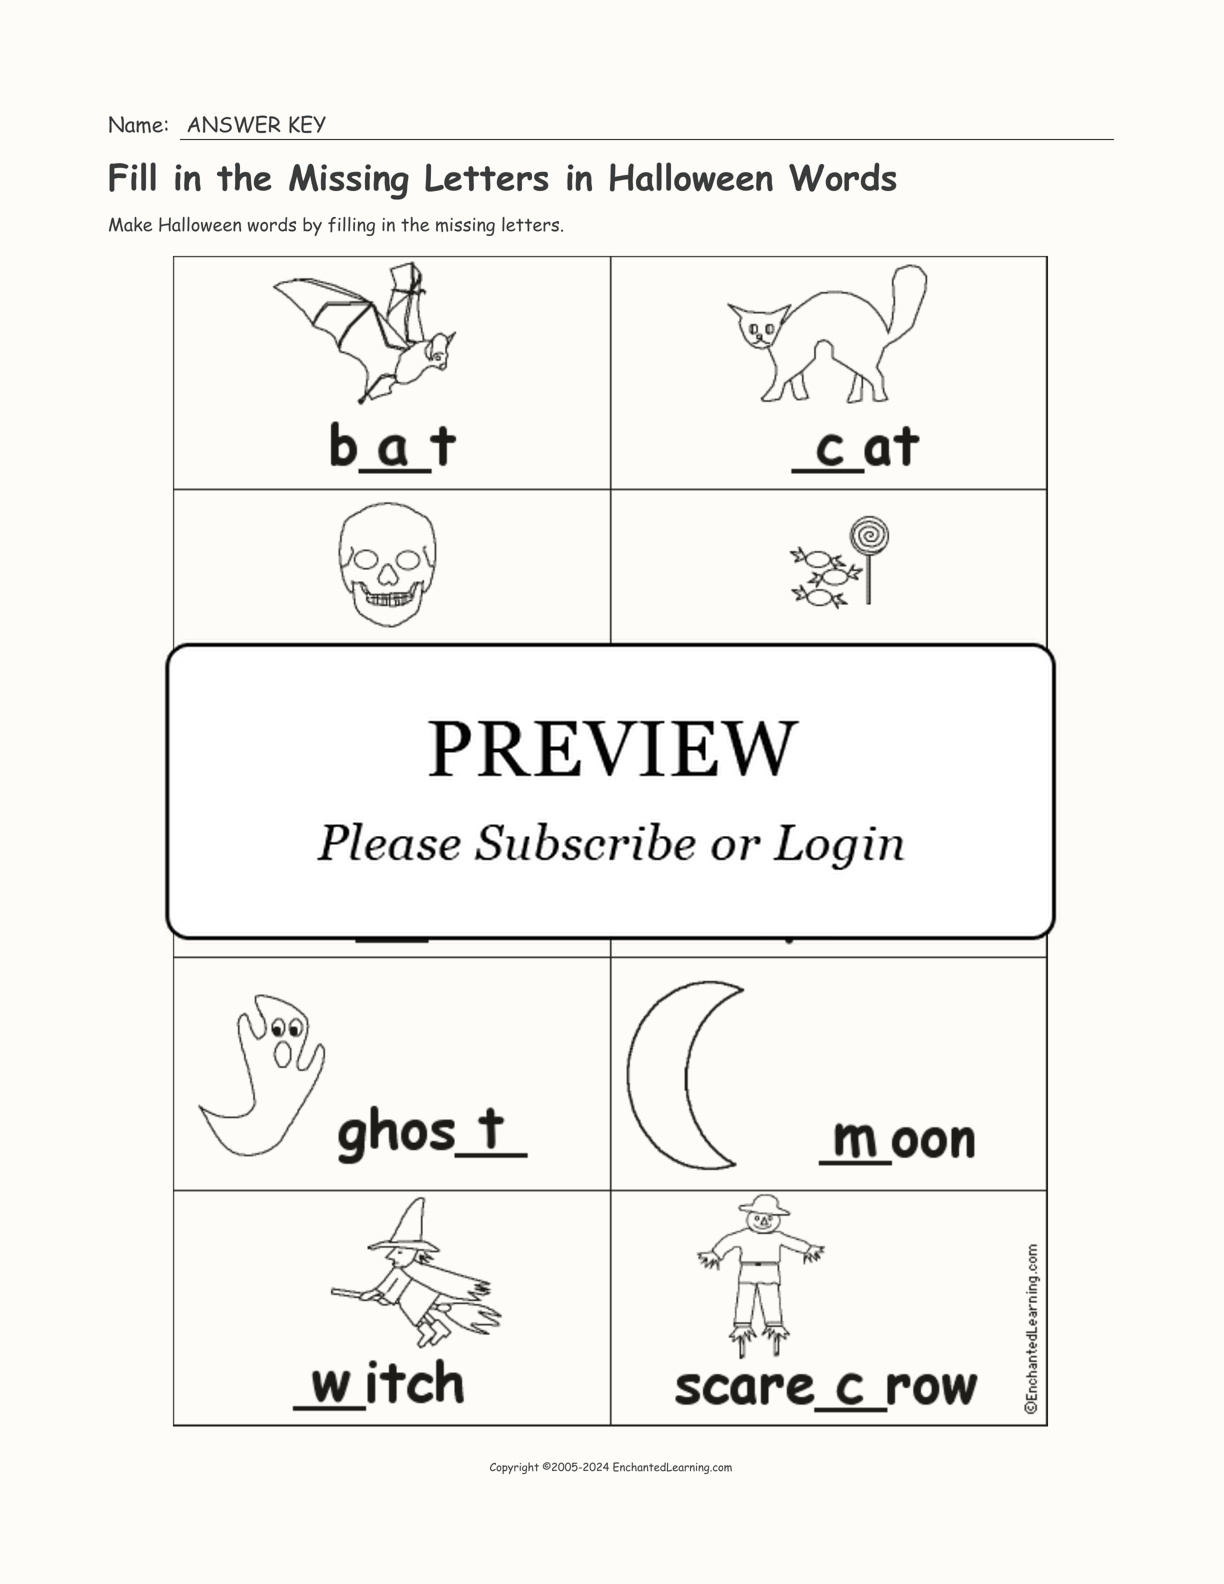 Fill in the Missing Letters in Halloween Words interactive worksheet page 2